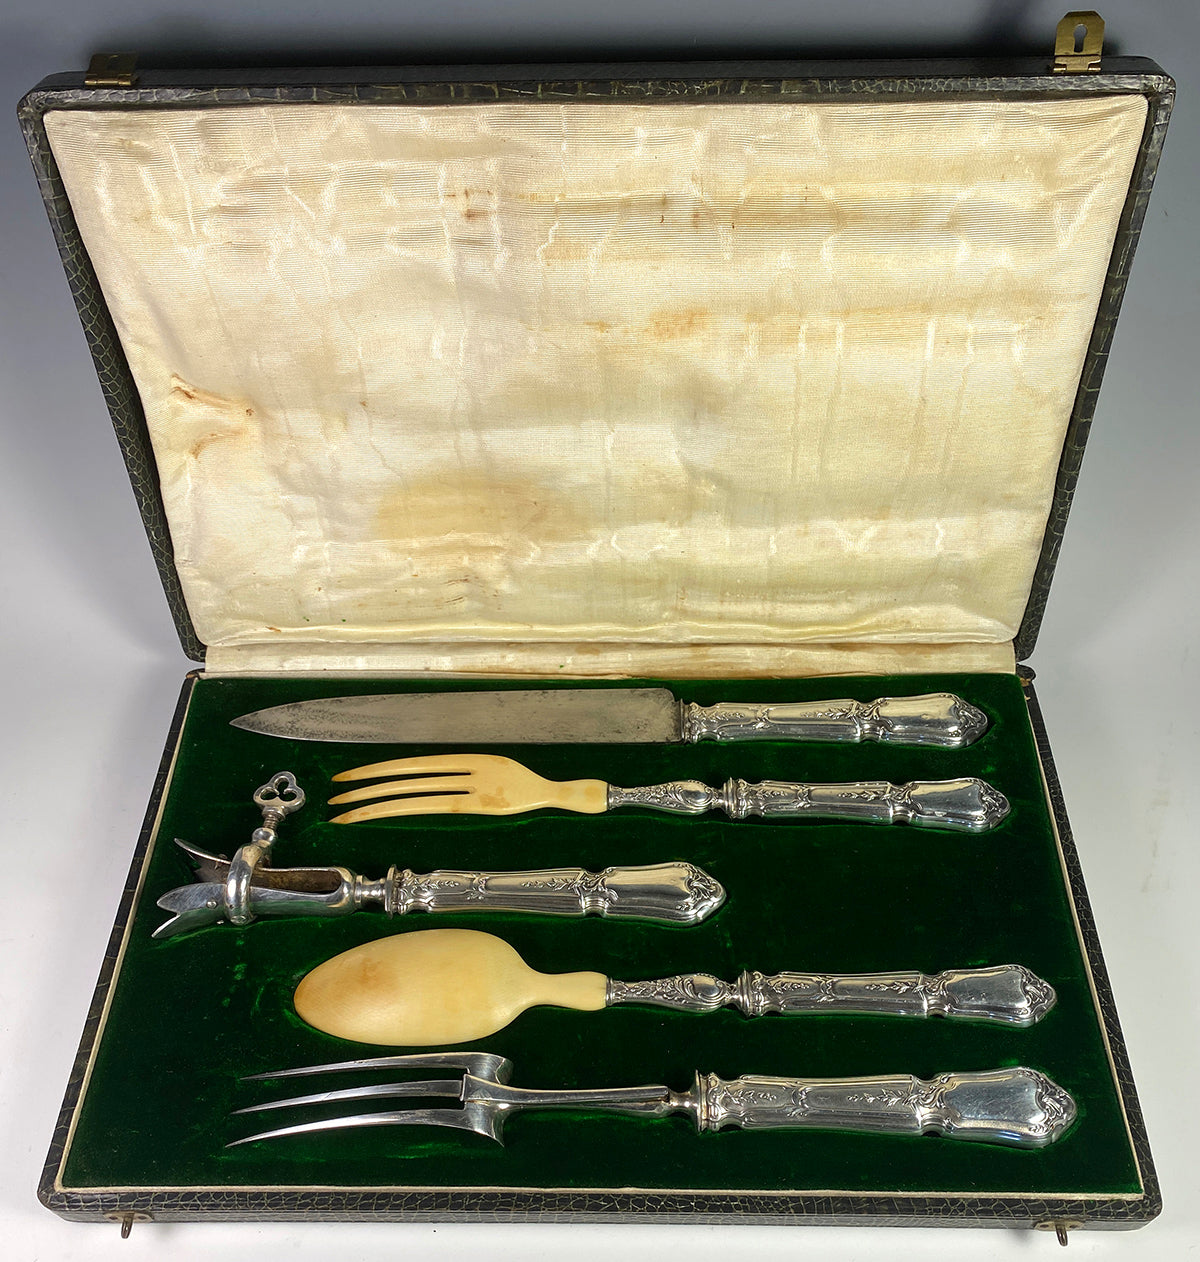 Set of 5 Antique French Sterling Silver Serving Pieces, Cutlery Carving Set 2 Gigot, Salad Set